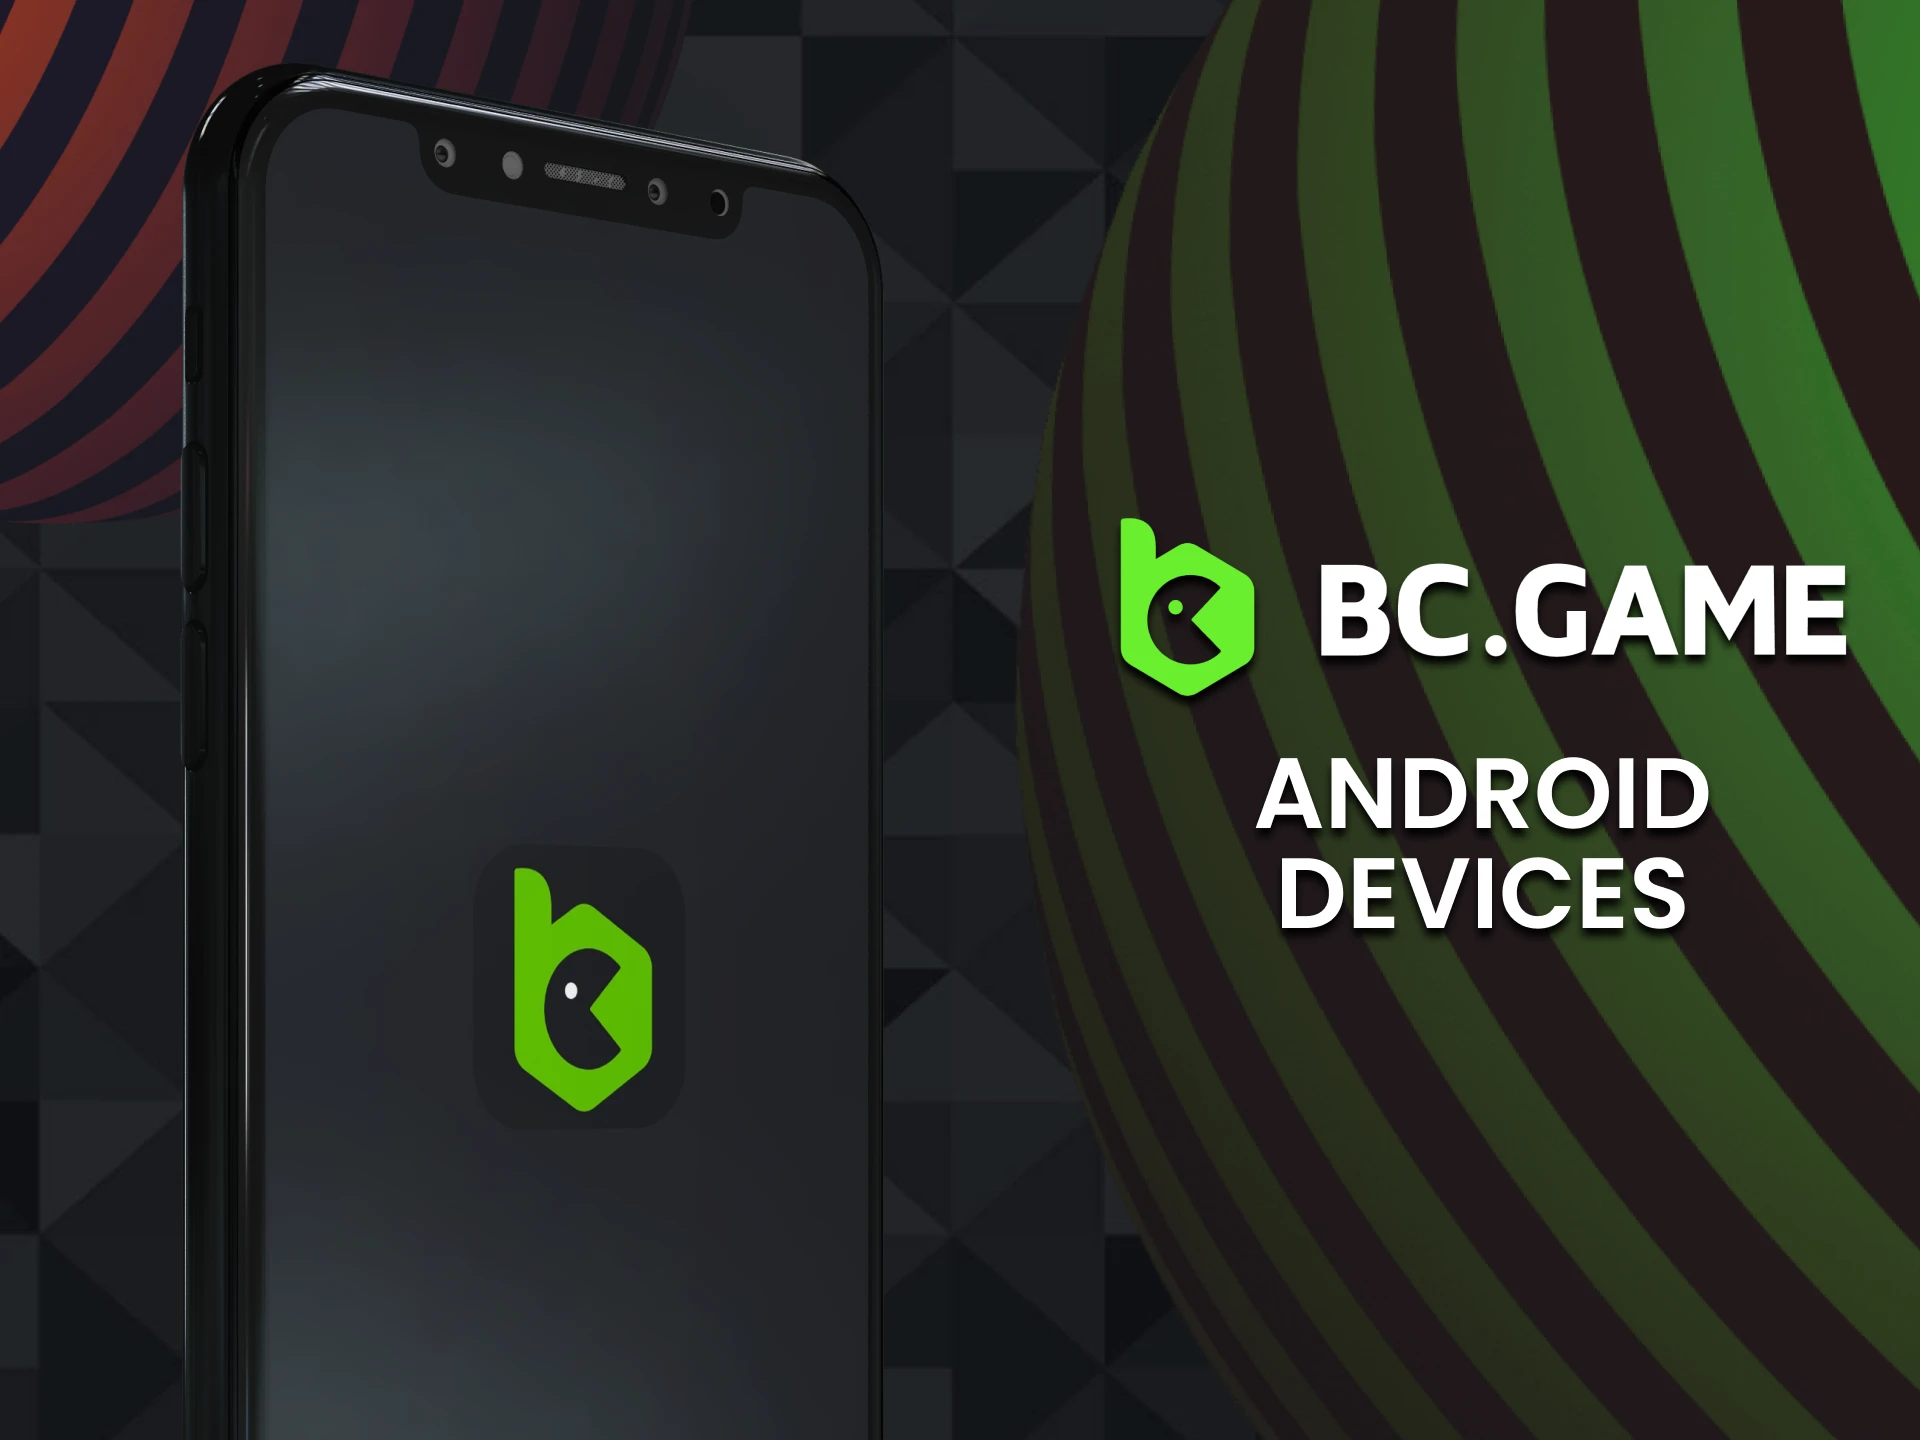 BC Game APK compatible with all Android devices.